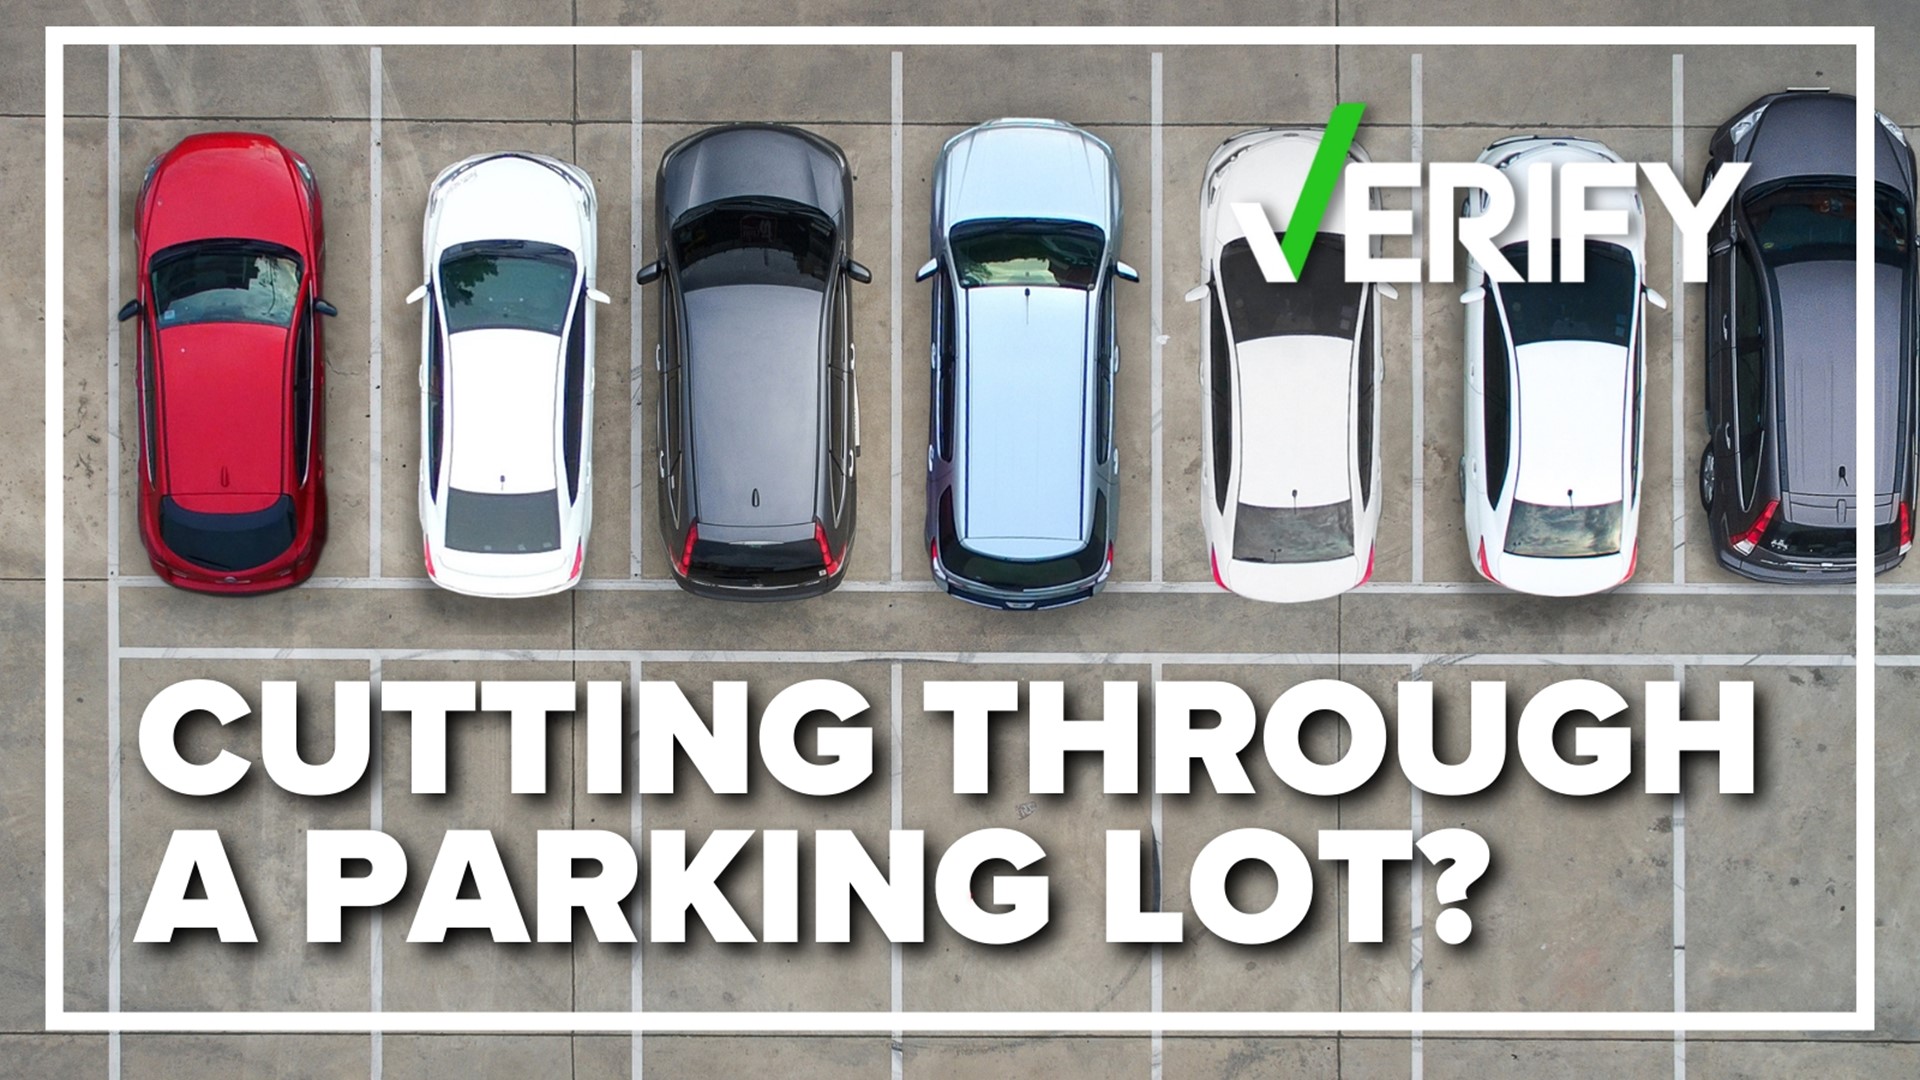 Is it illegal to cut through a parking lot or gas station to avoid stopping at a red light? Our Verify team gets the answers.